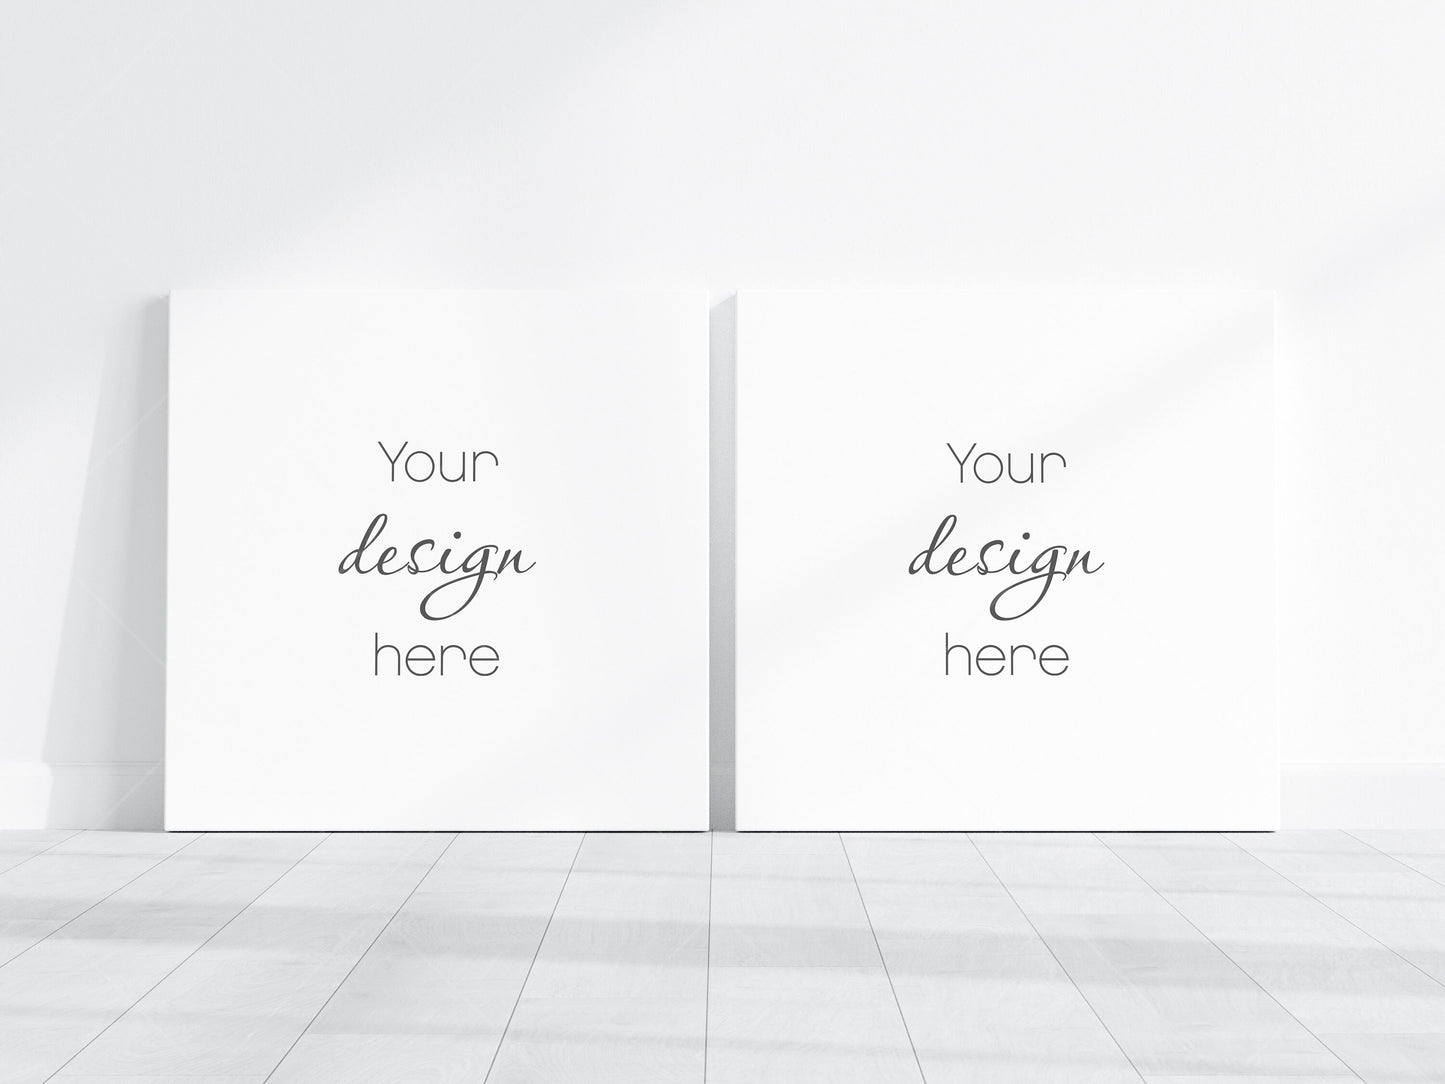 Two 1x1 Canvases Mockup PSD, 2 Square Canvases Mockup Smart Object in Photoshop, Minimalist Square Canvases Mockup JPG PSD